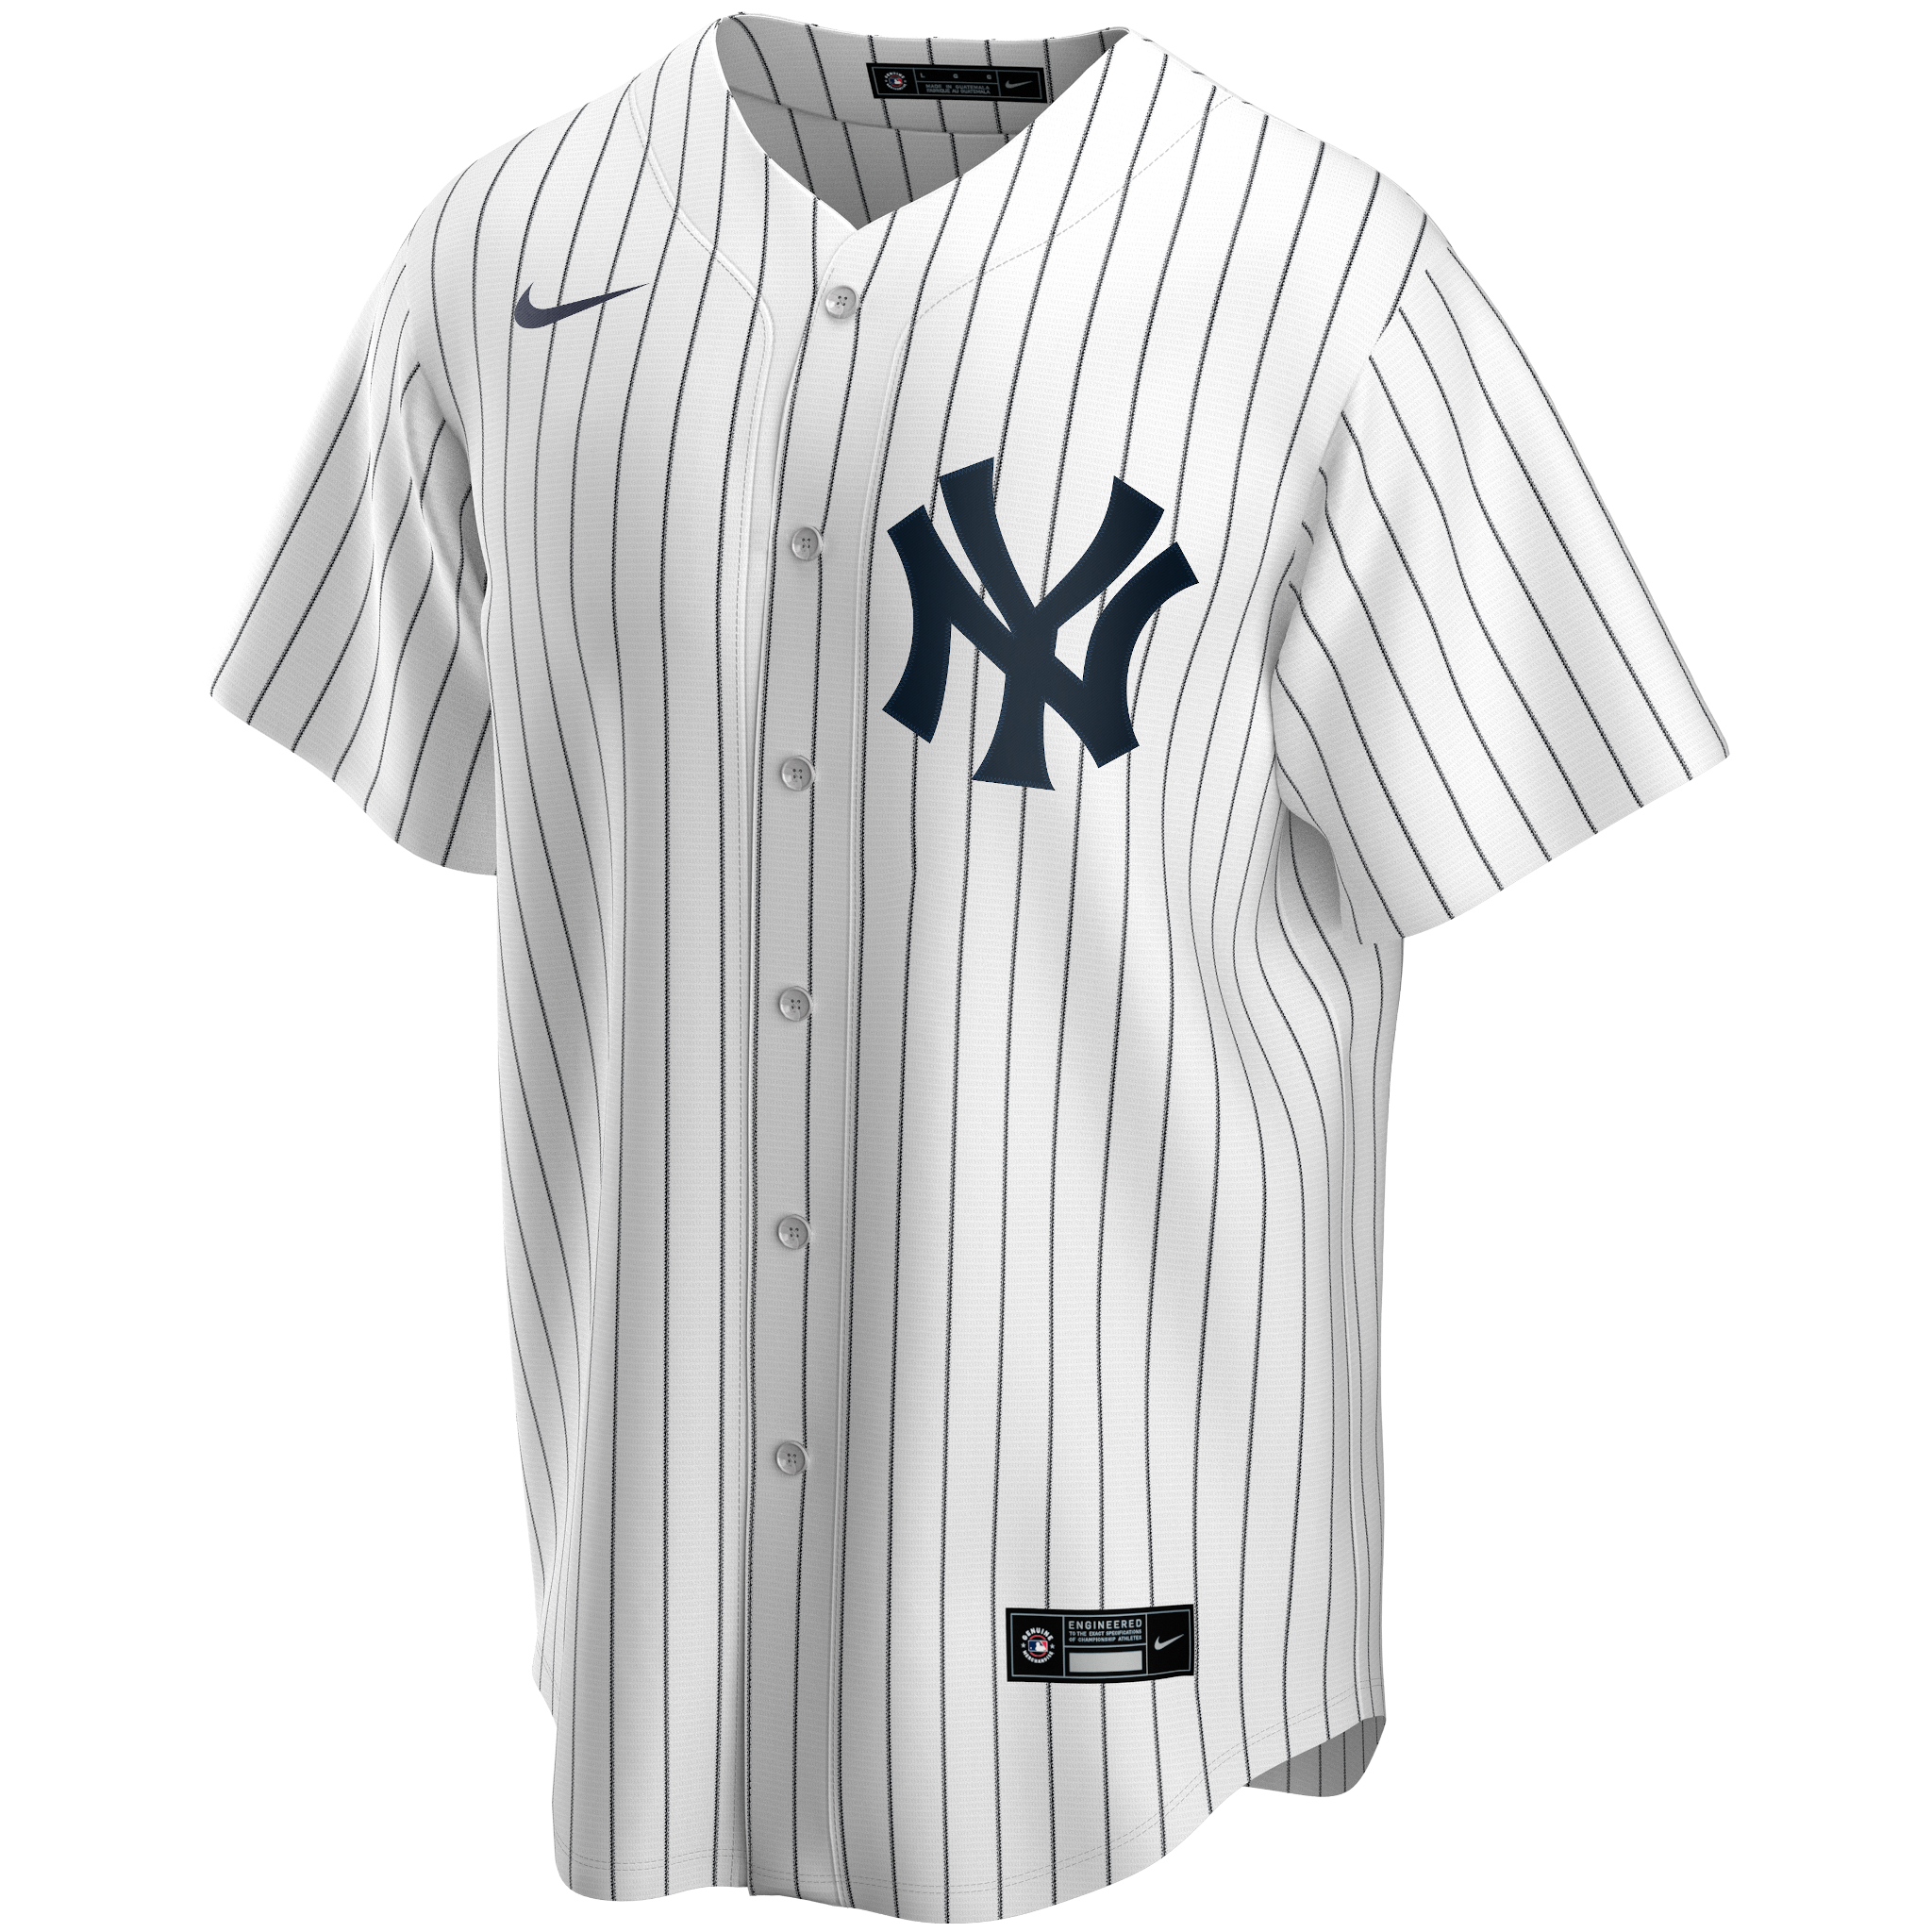 Men's Nike Lou Gehrig White New York Yankees Home Cooperstown Collection Player Jersey